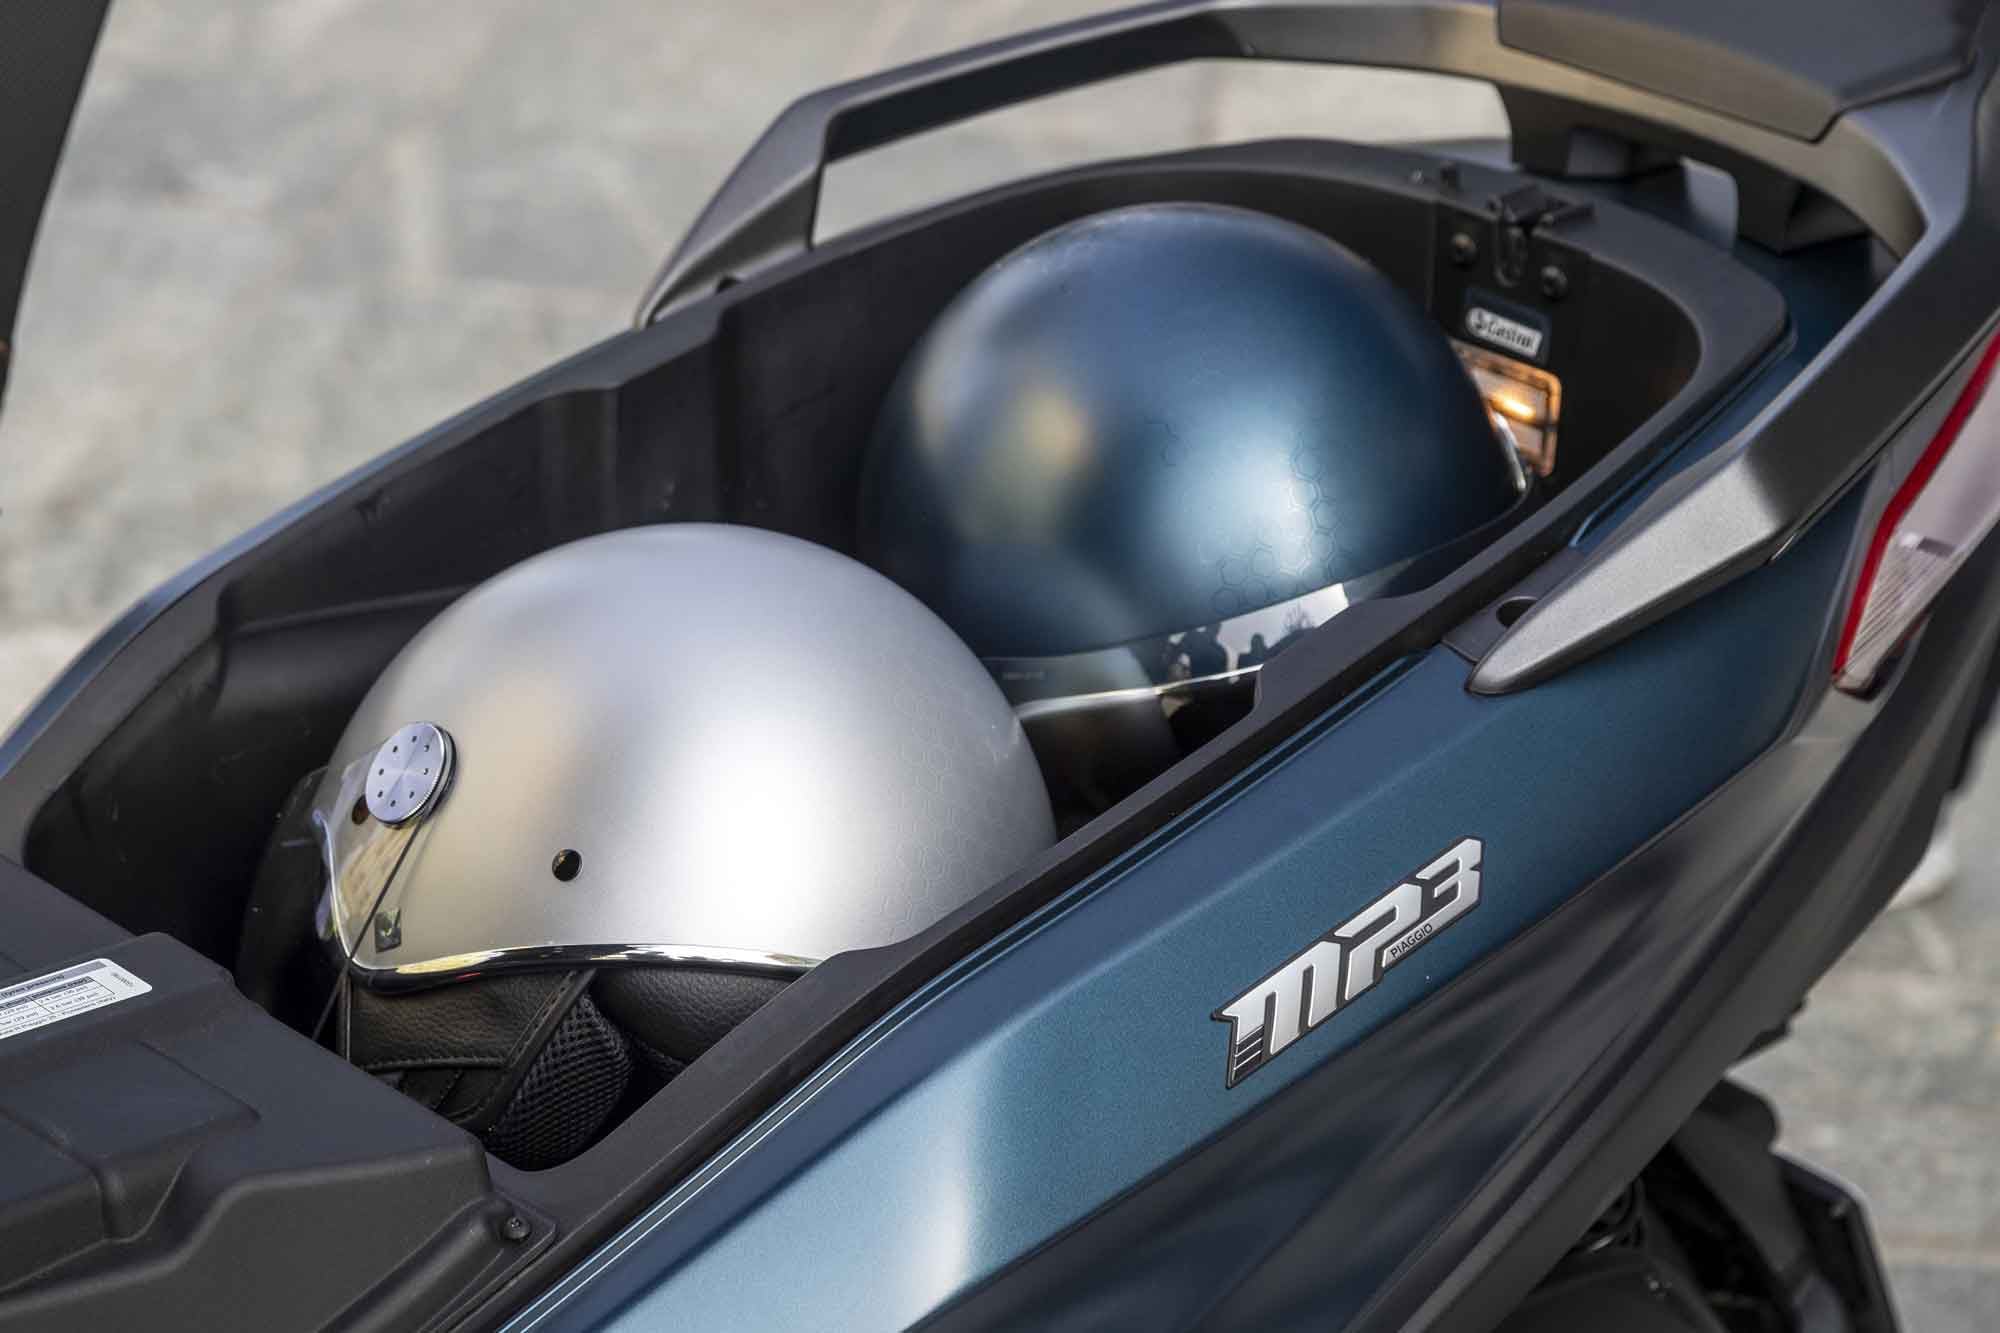 Also fitting with the GT scooter concept, the MP3 offers excellent integrated storage under the seat.